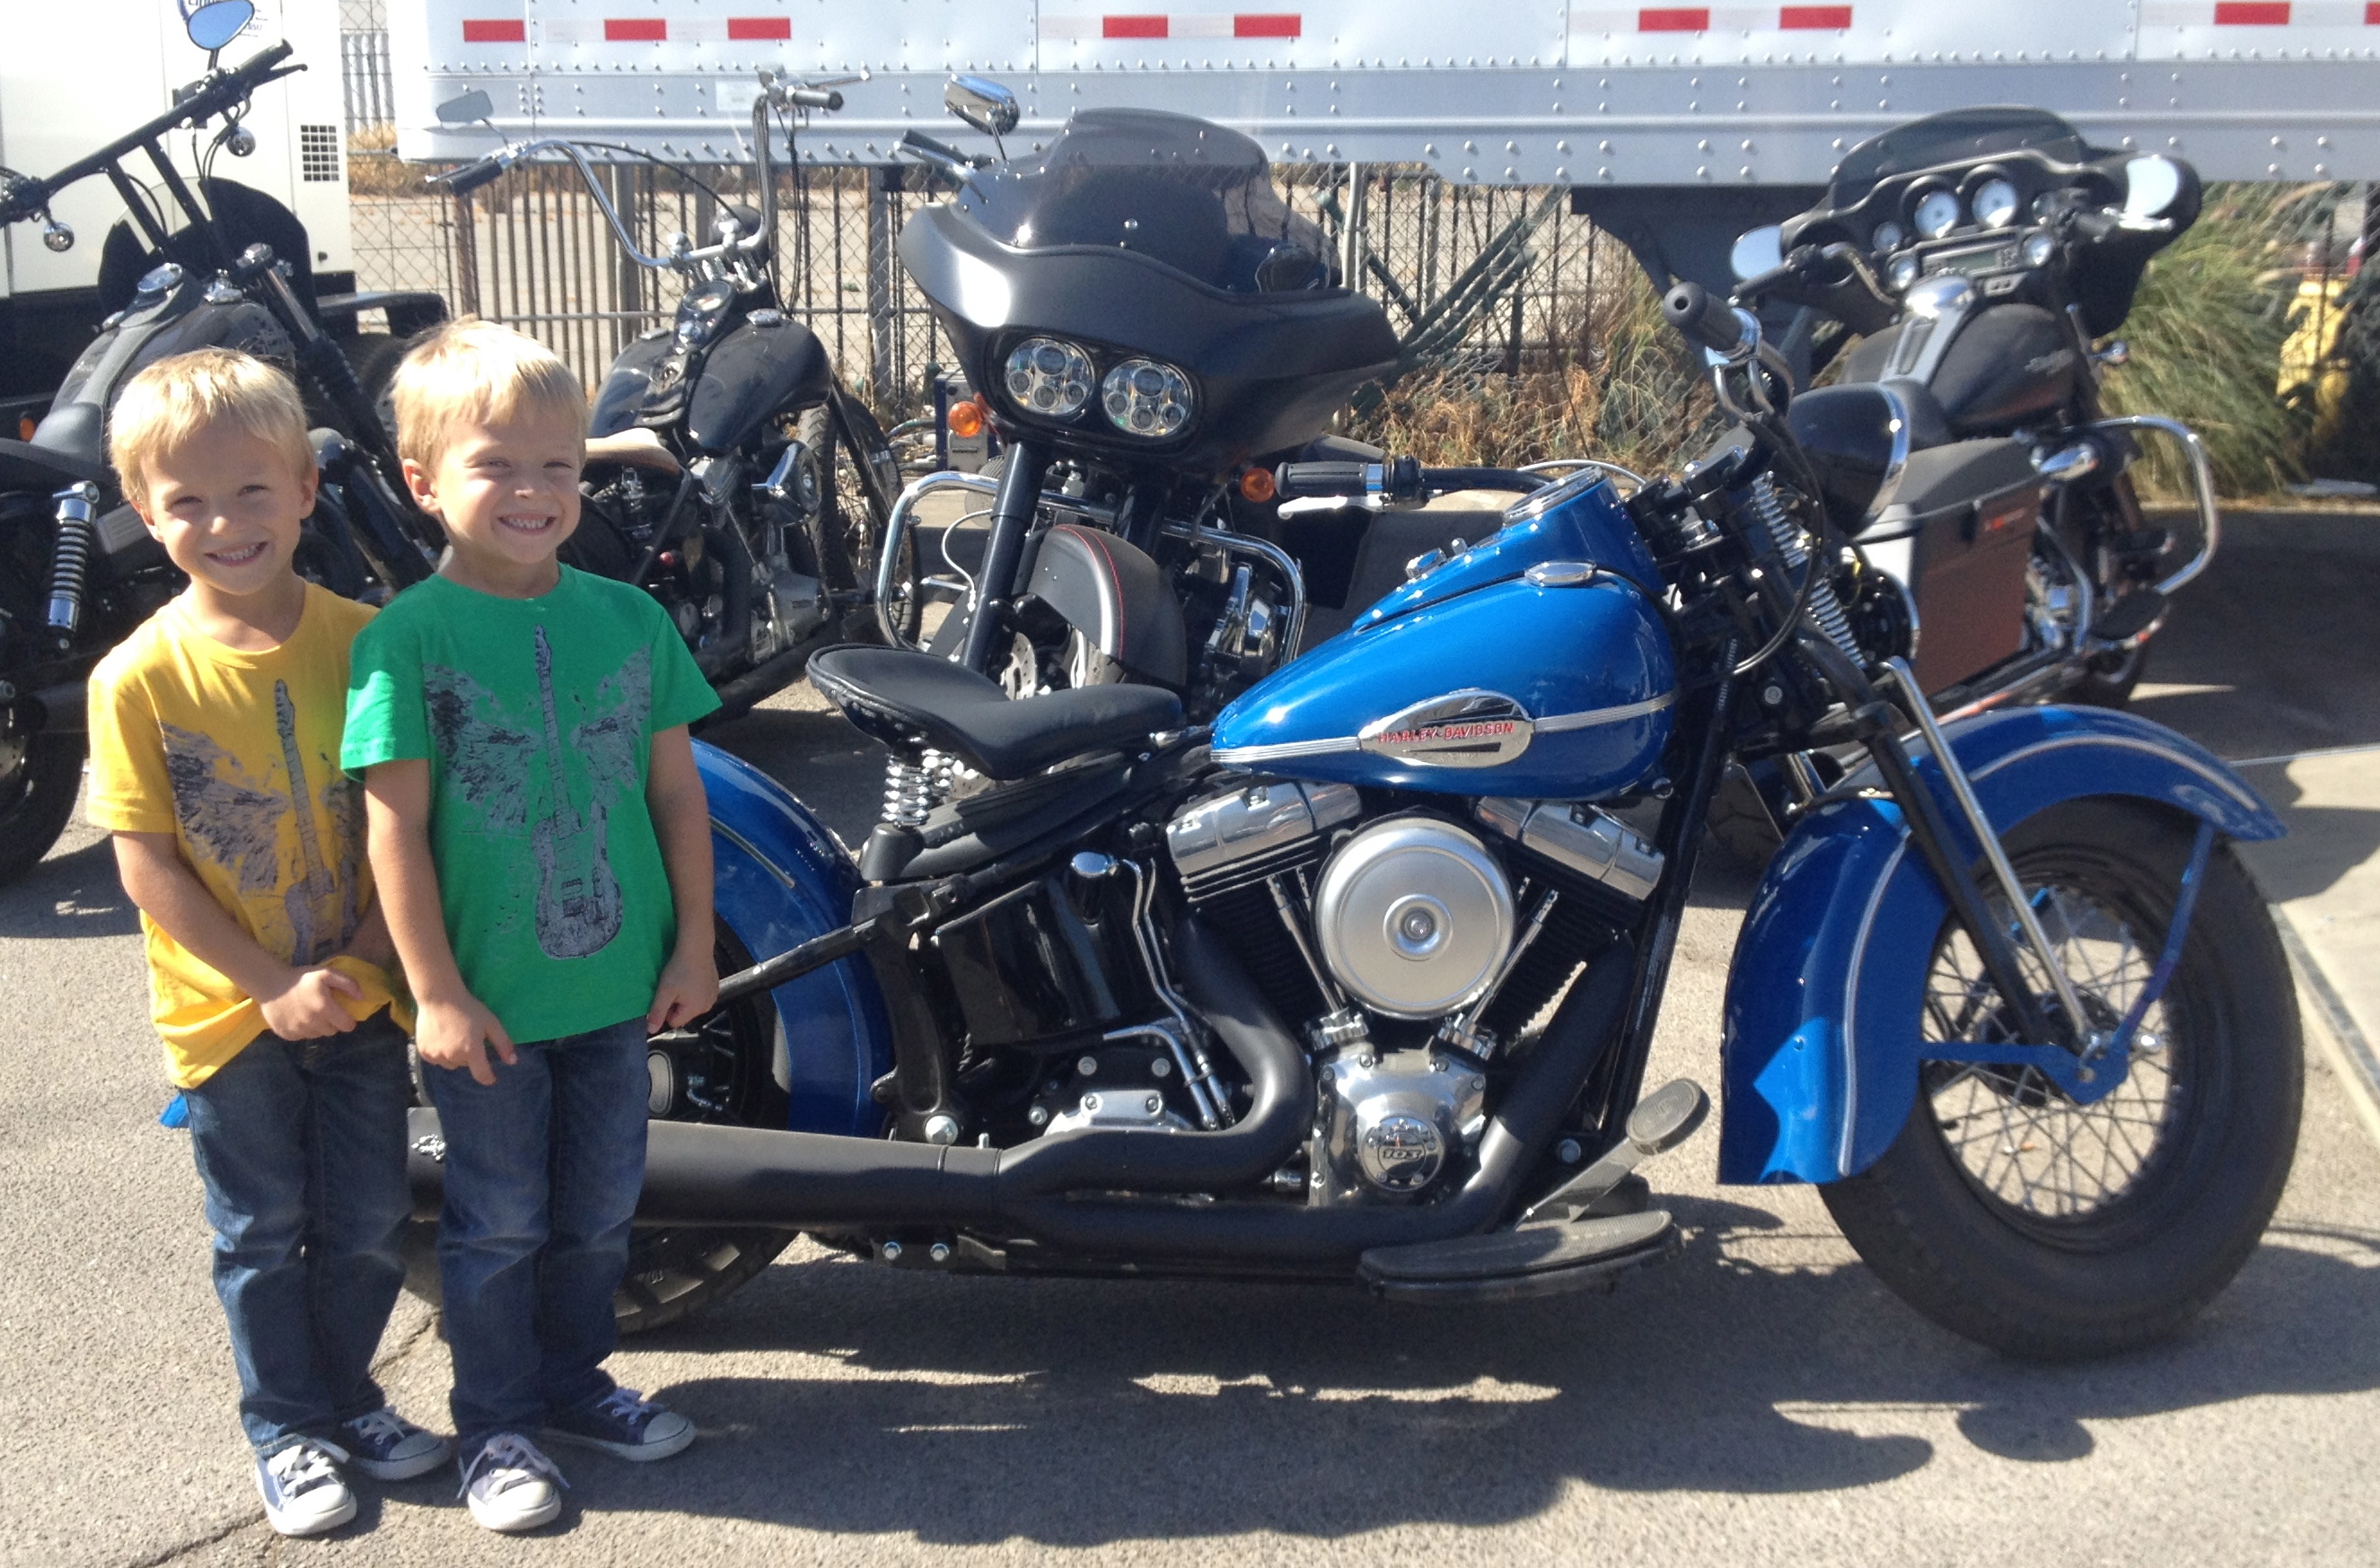 Evan and Ryder Londo on set of Sons of Anarchy Season 7